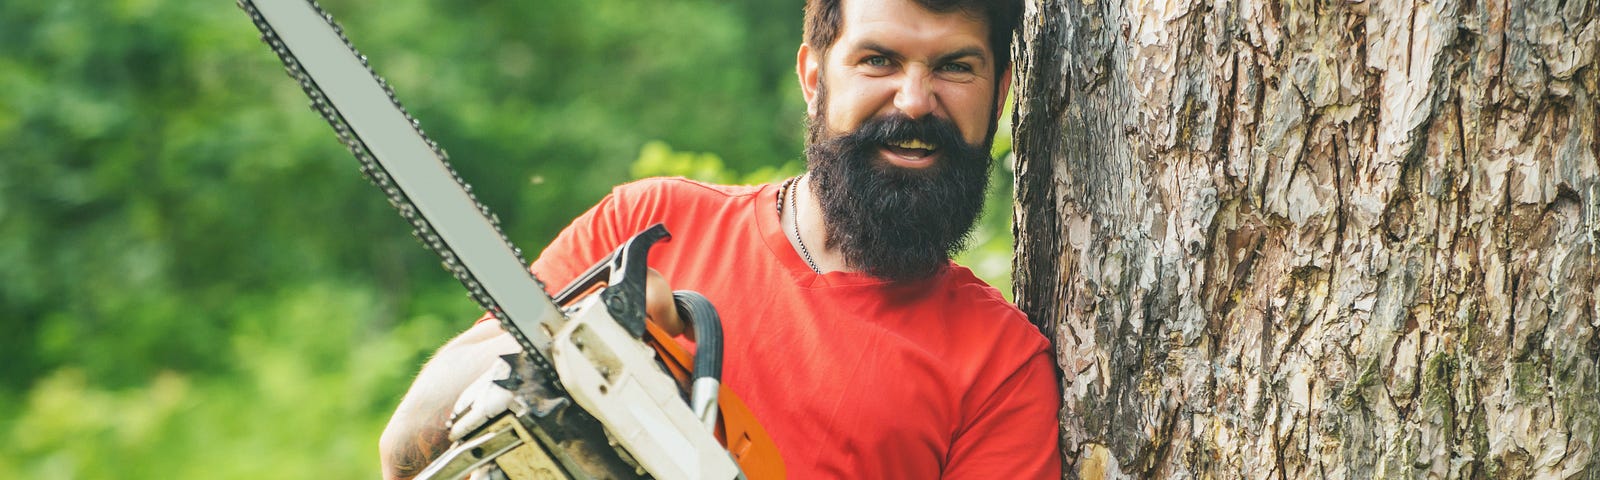 bearded man with chainsaw